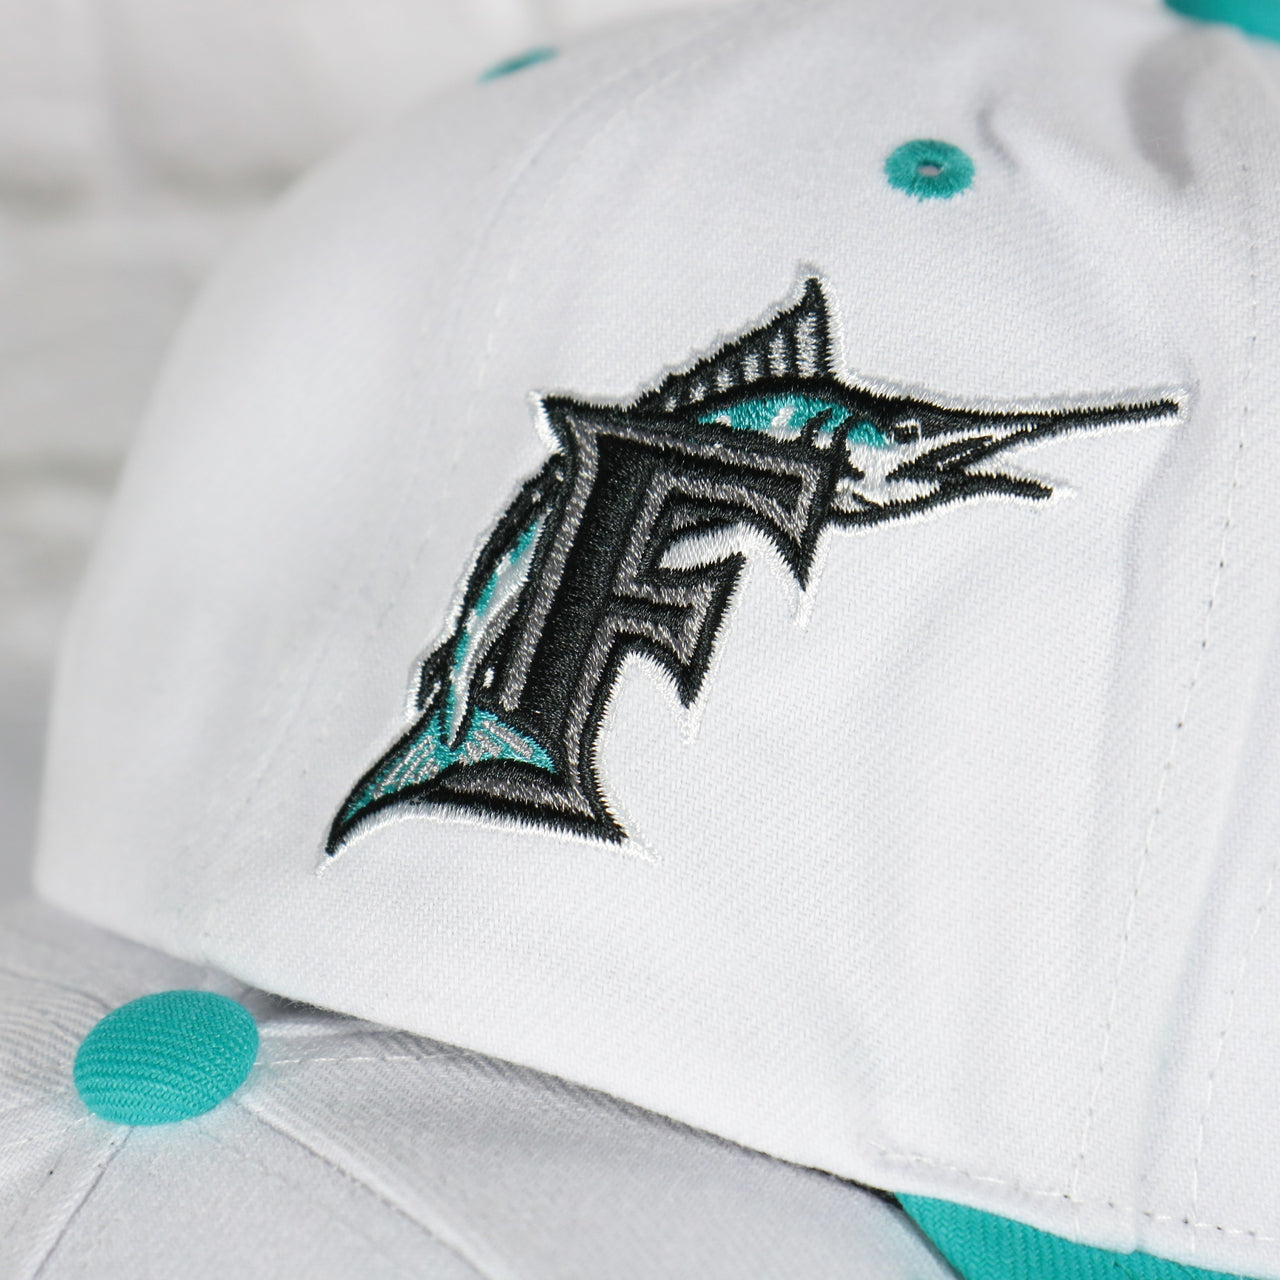 marlins logo side patch on the Florida Marlins Cooperstown "Marlins" Jersey Script 1993 Marlins logo side patch Evergreen Pro | White/Teal Snapback Hat